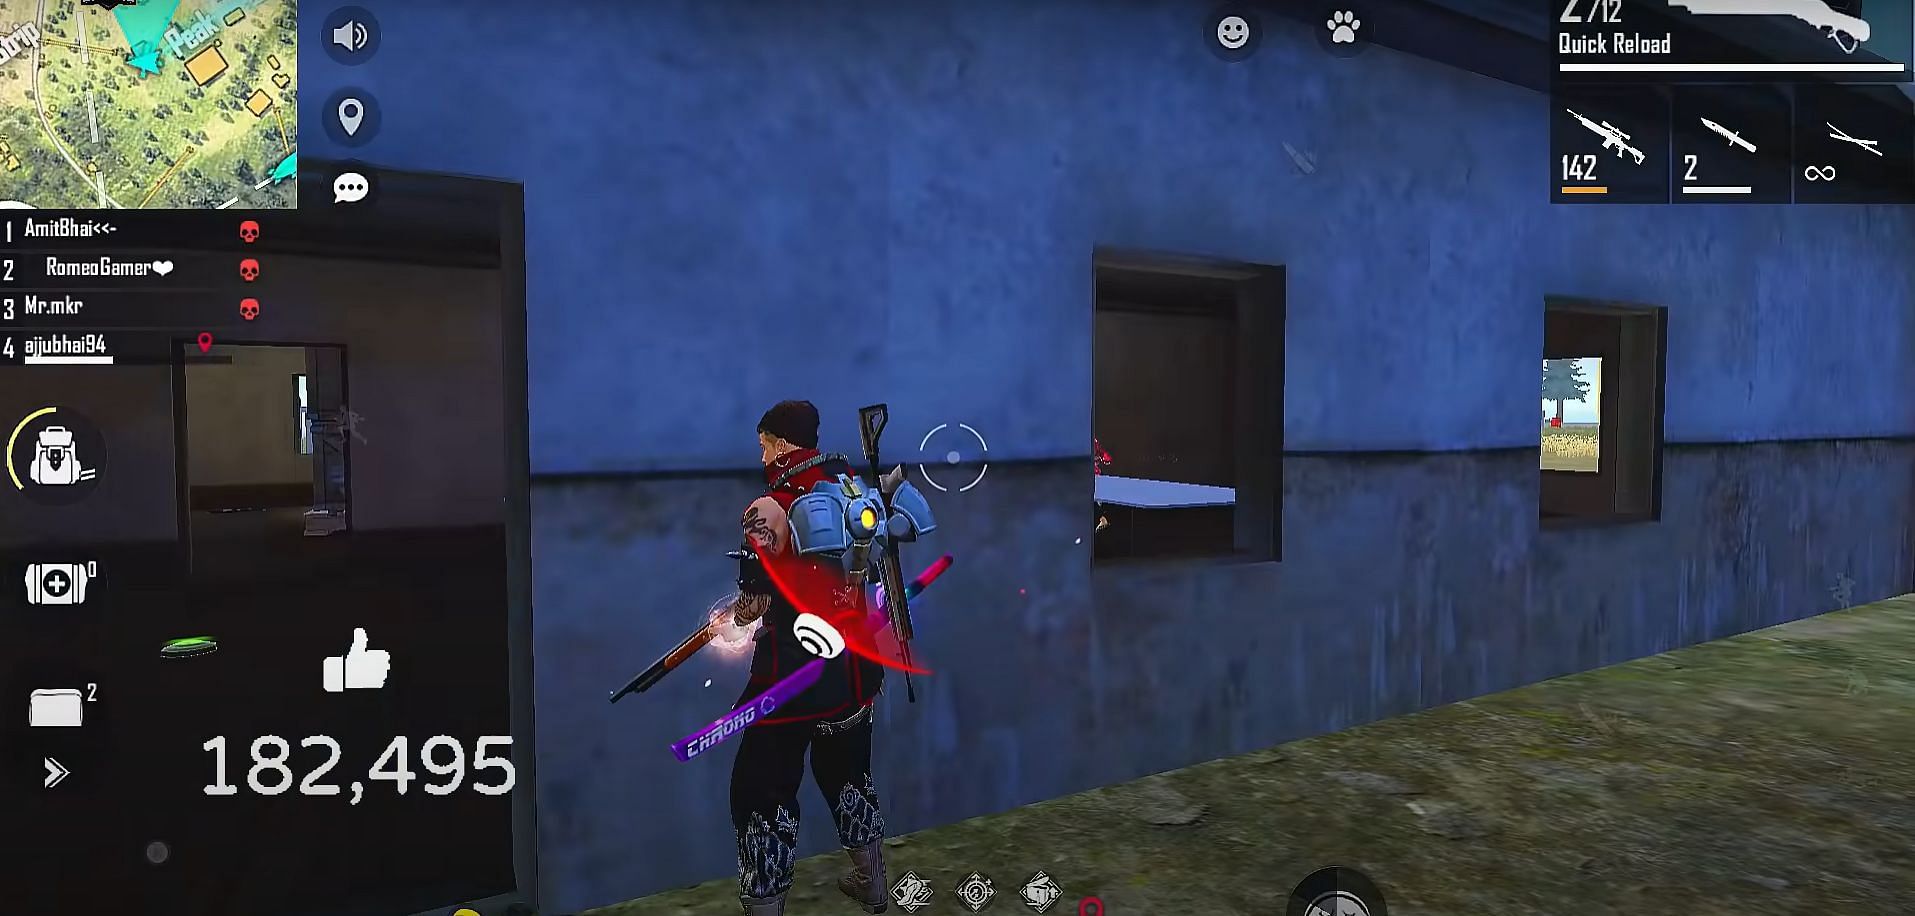 Landmine getting triggered in Free Fire (Image via Total Gaming)